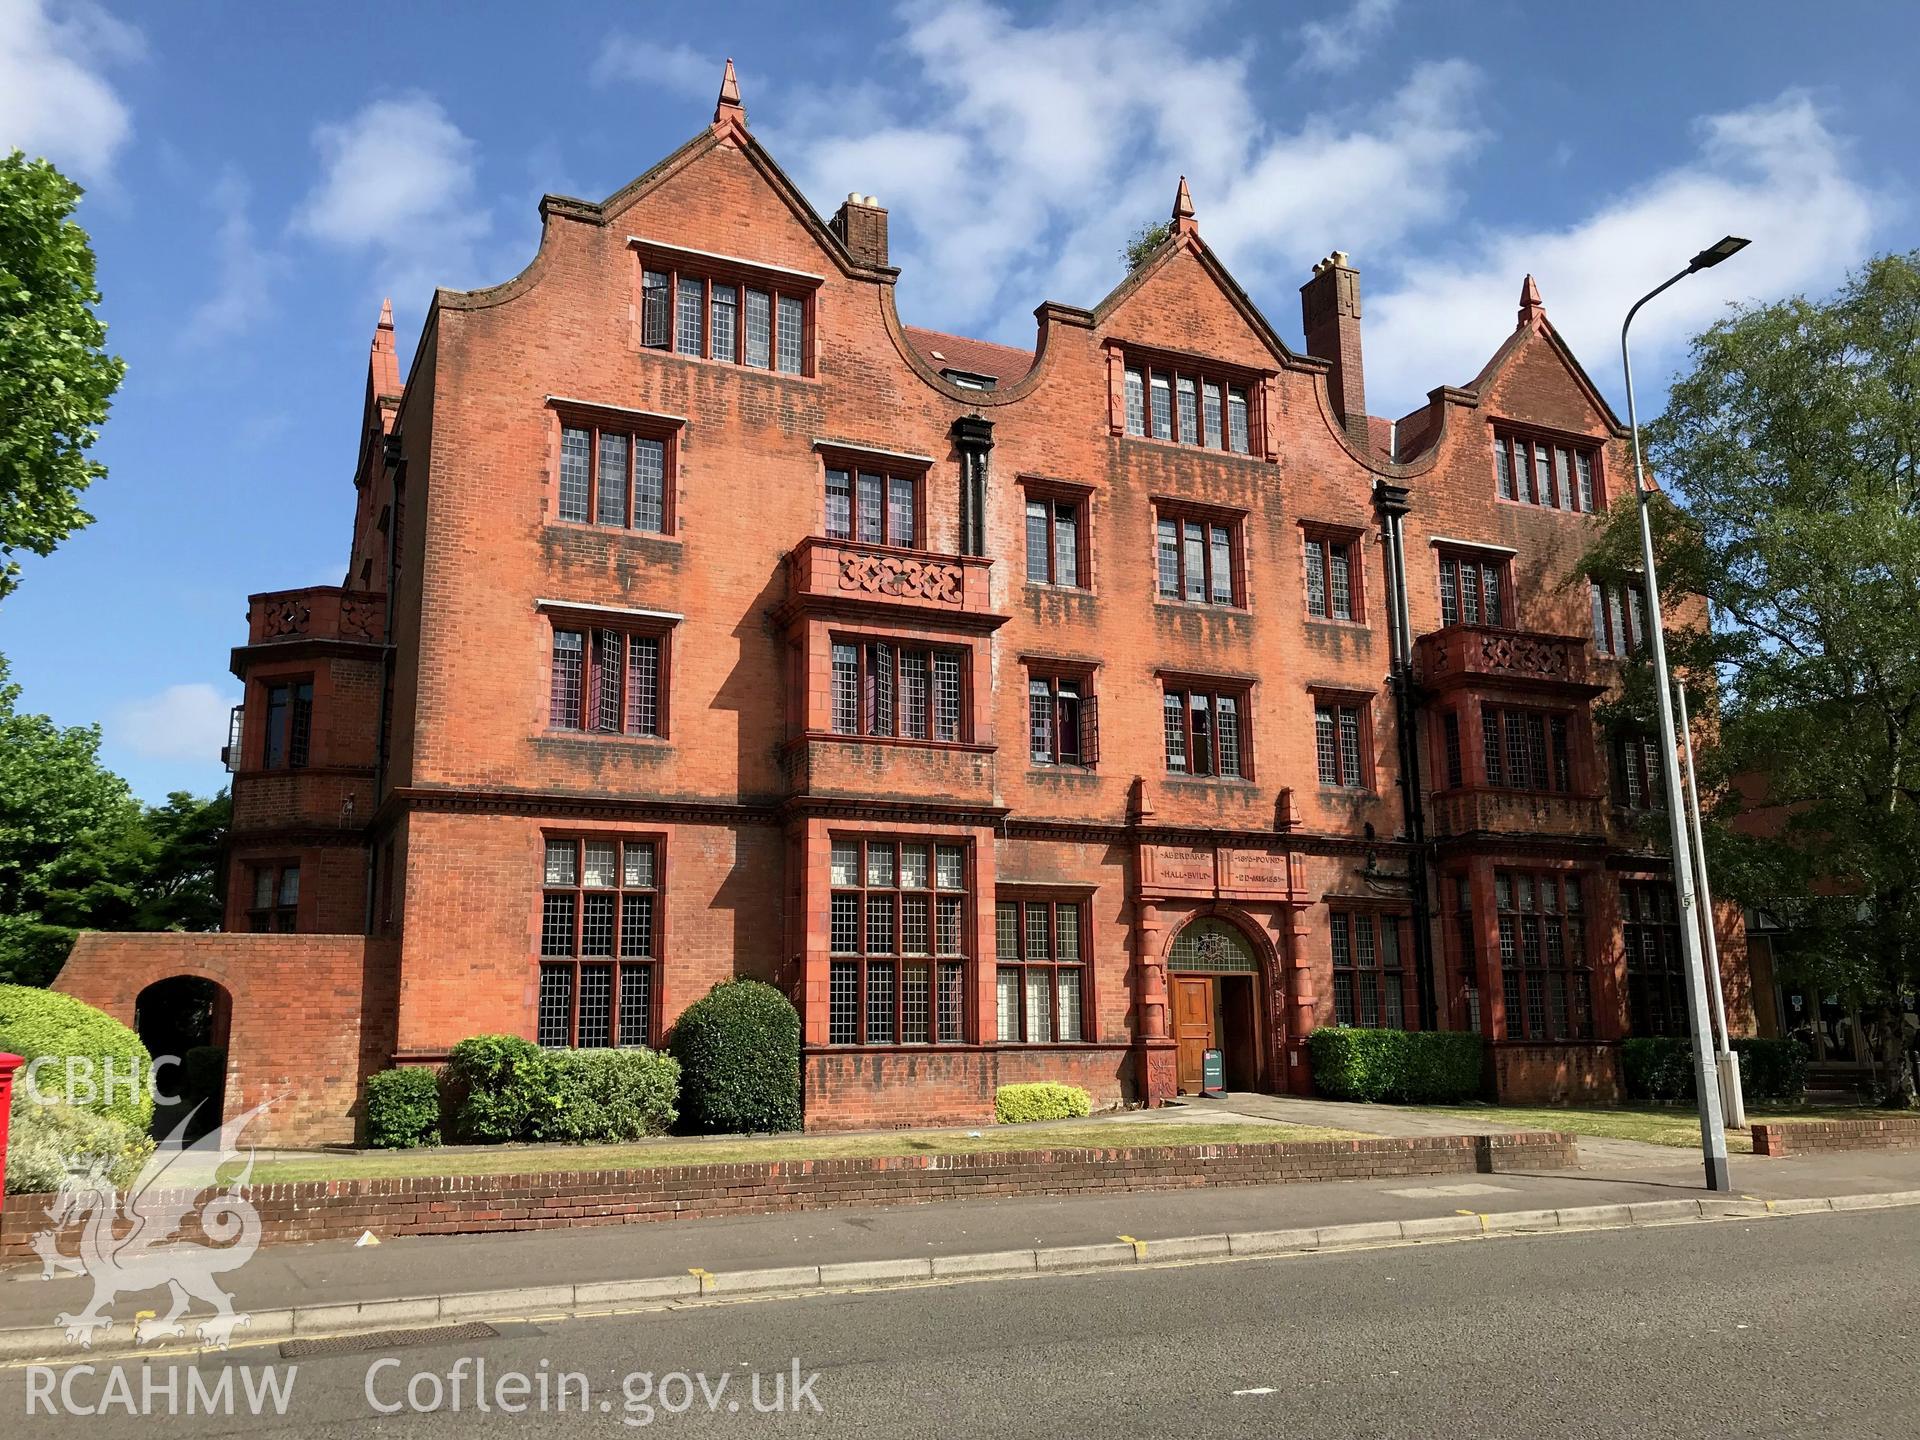 Front elevation of Aberdare Hall at Cardiff University, Cathays Park, Cardiff. Colour photograph taken by Paul R. Davis on 30th June 2018.